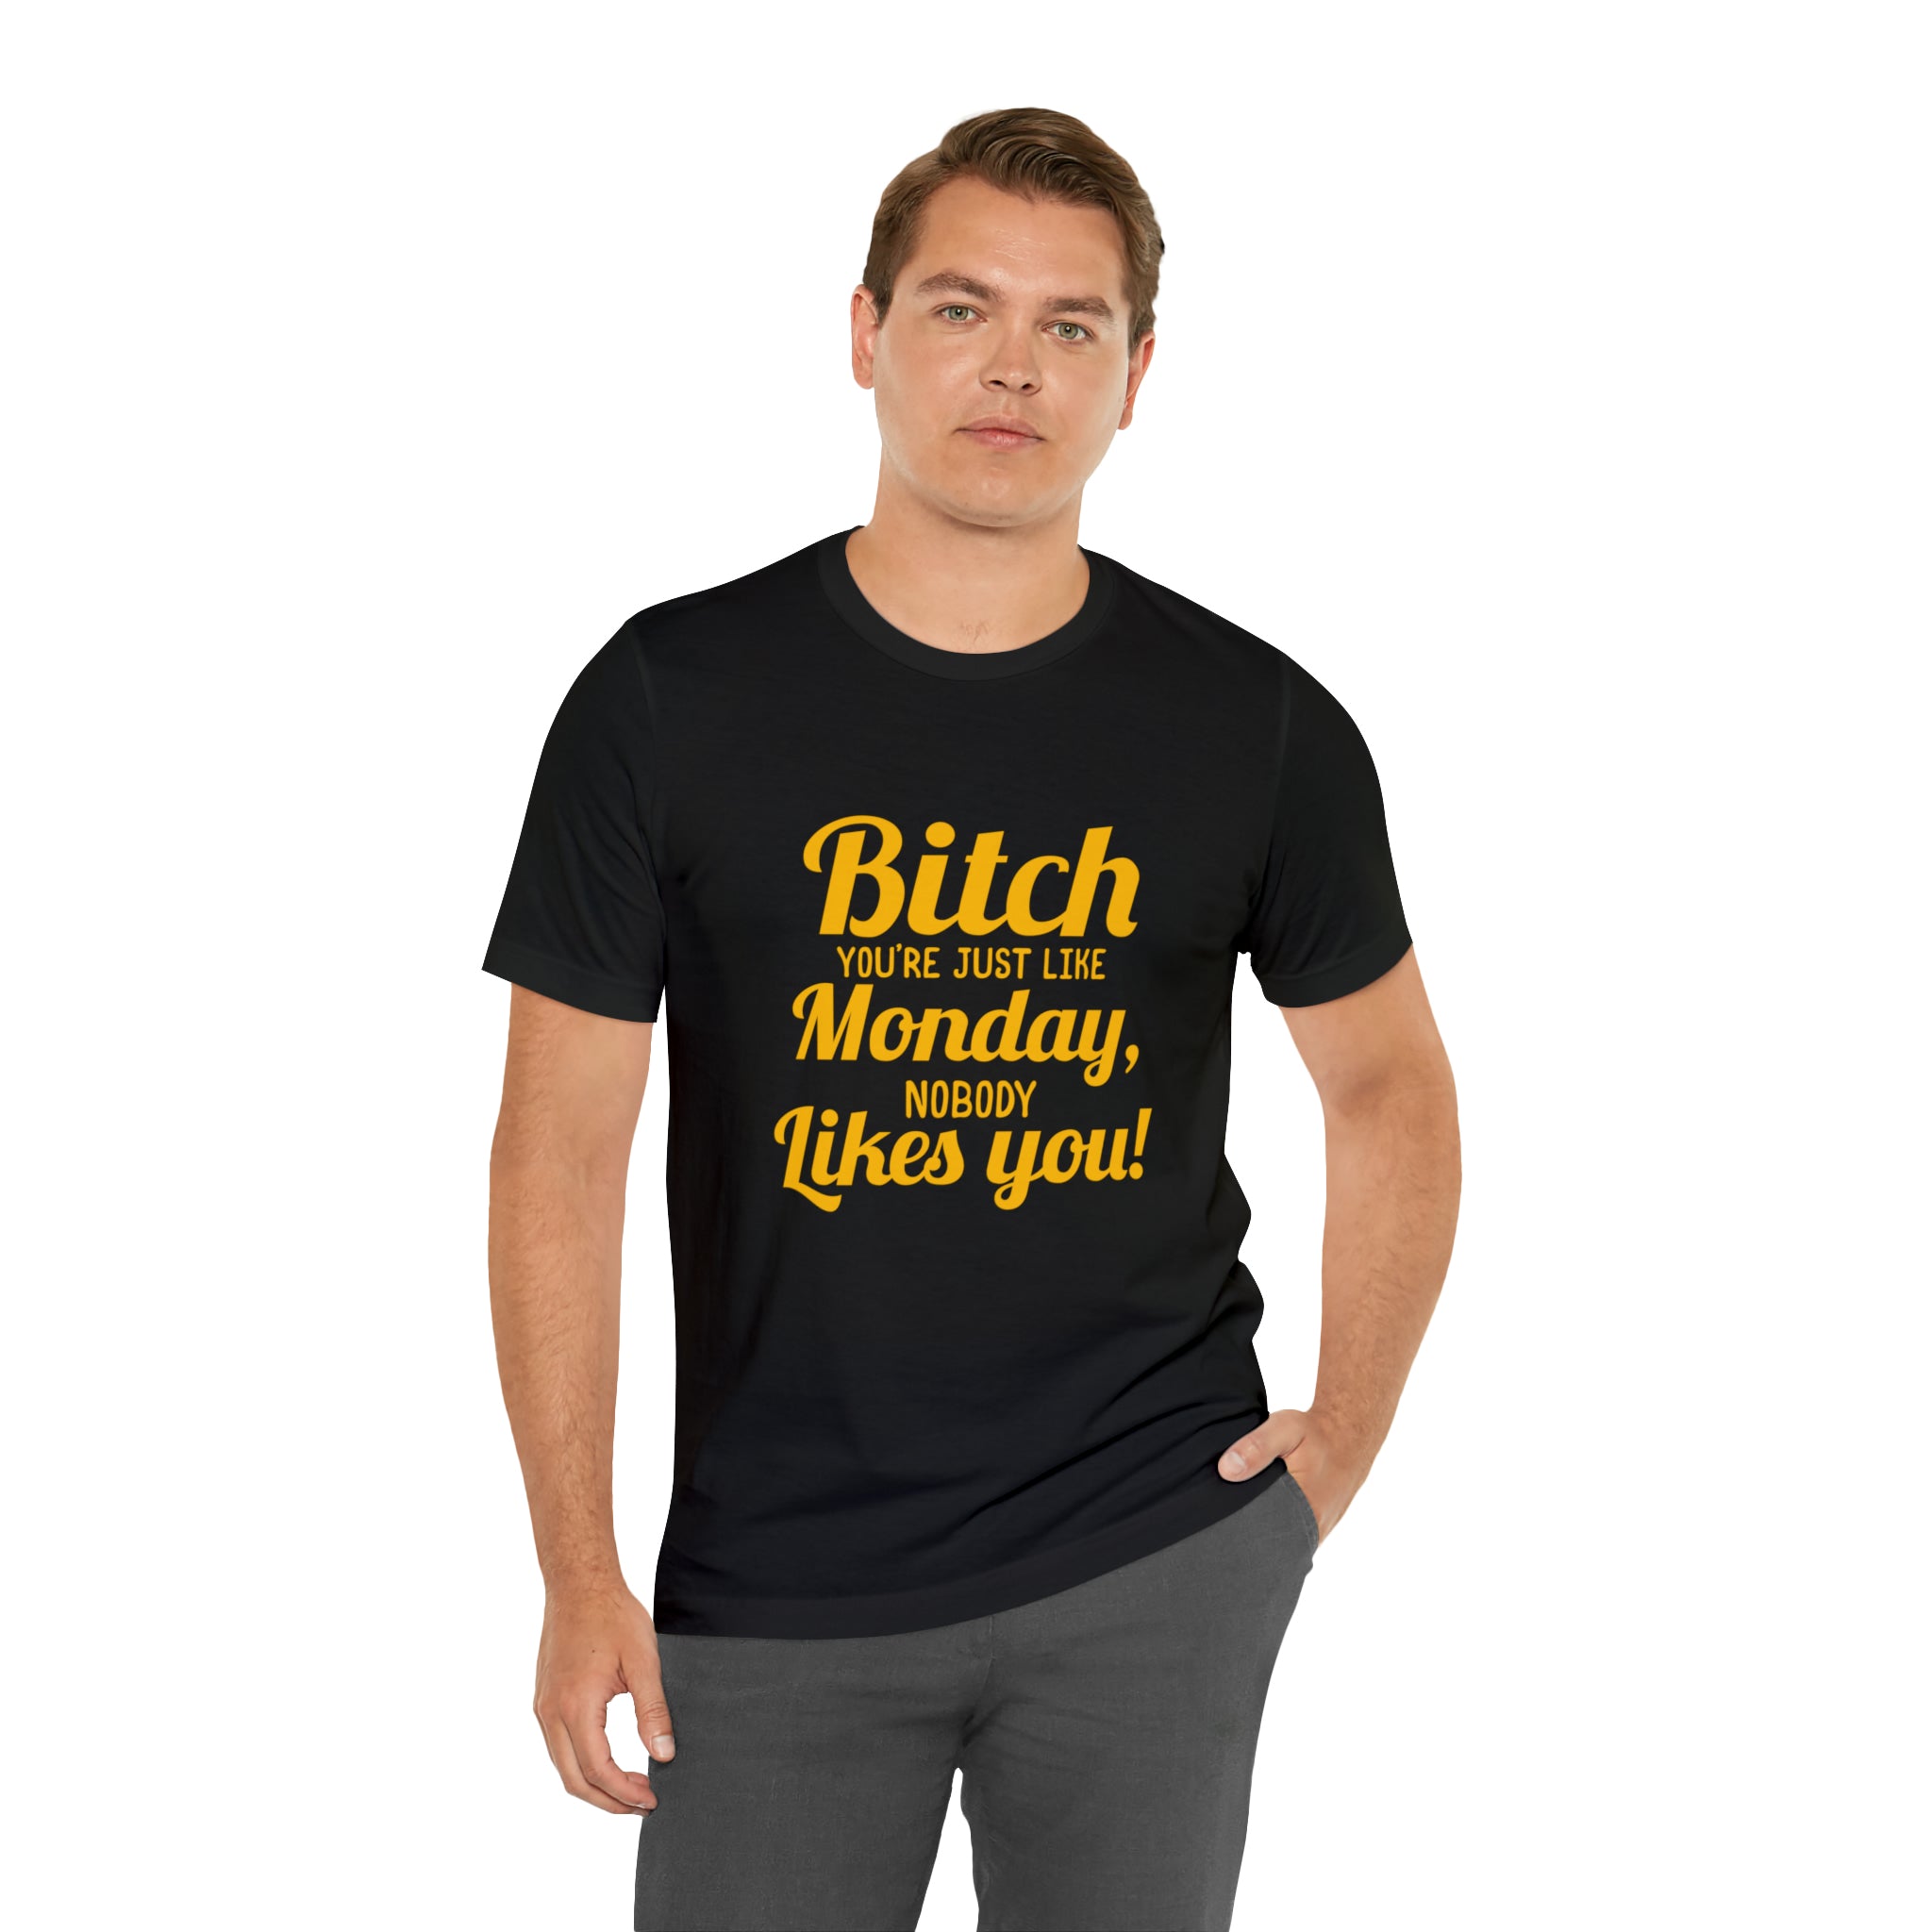 Bitch you are just like Monday nobody likes you T-shirt for a stylish look.